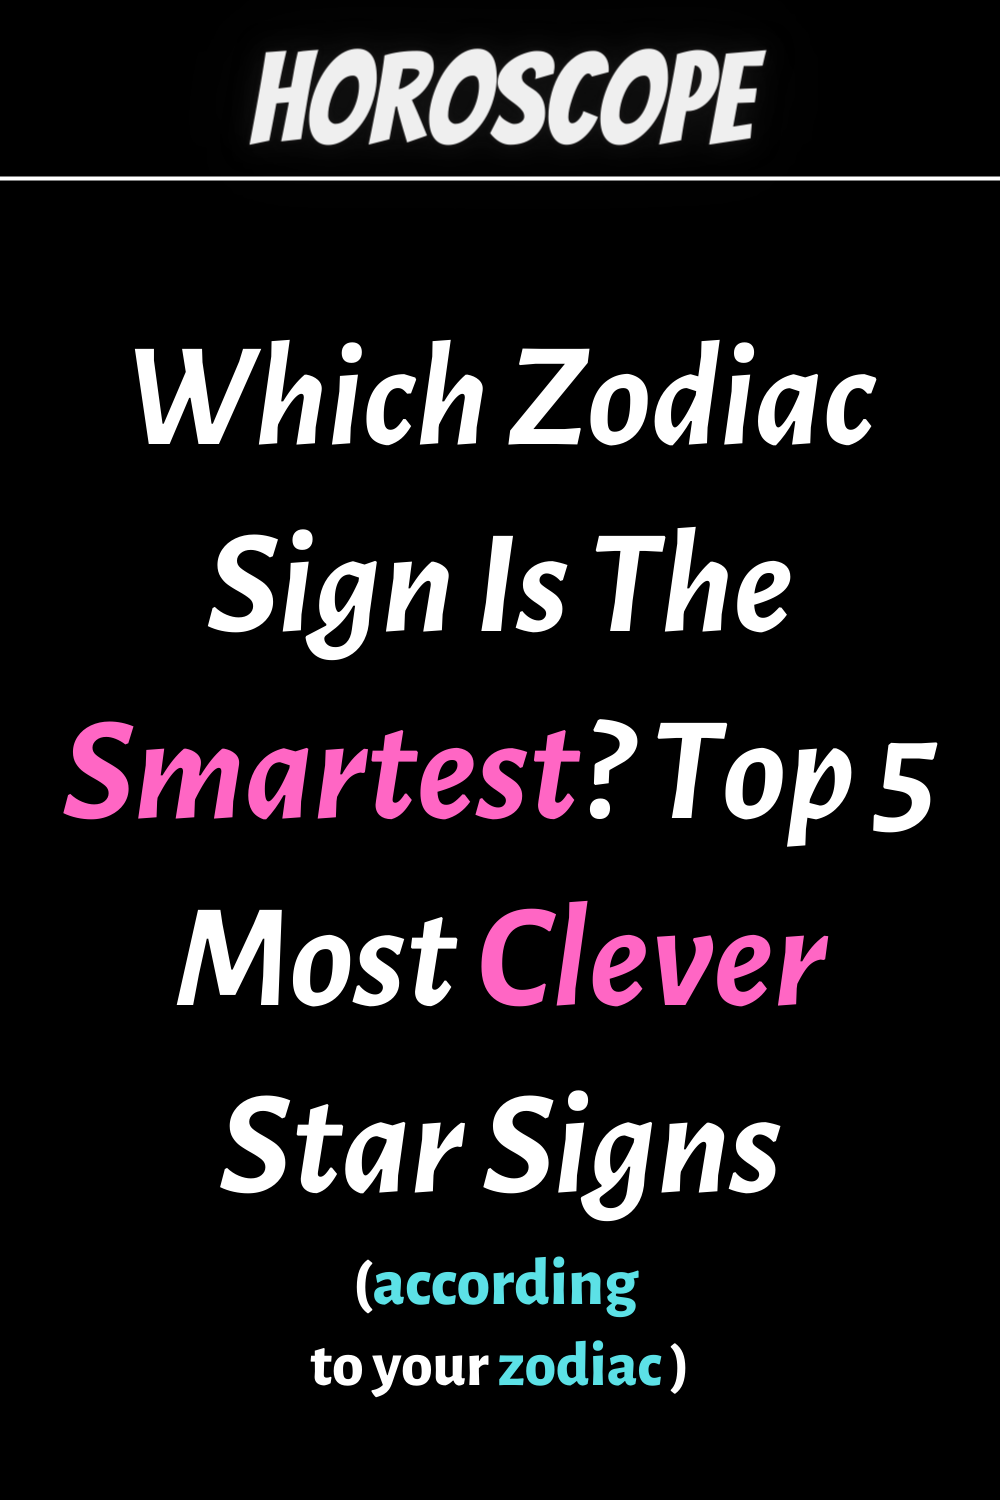 Which Zodiac Sign Is The Smartest? Top 5 Most Clever Star Signs